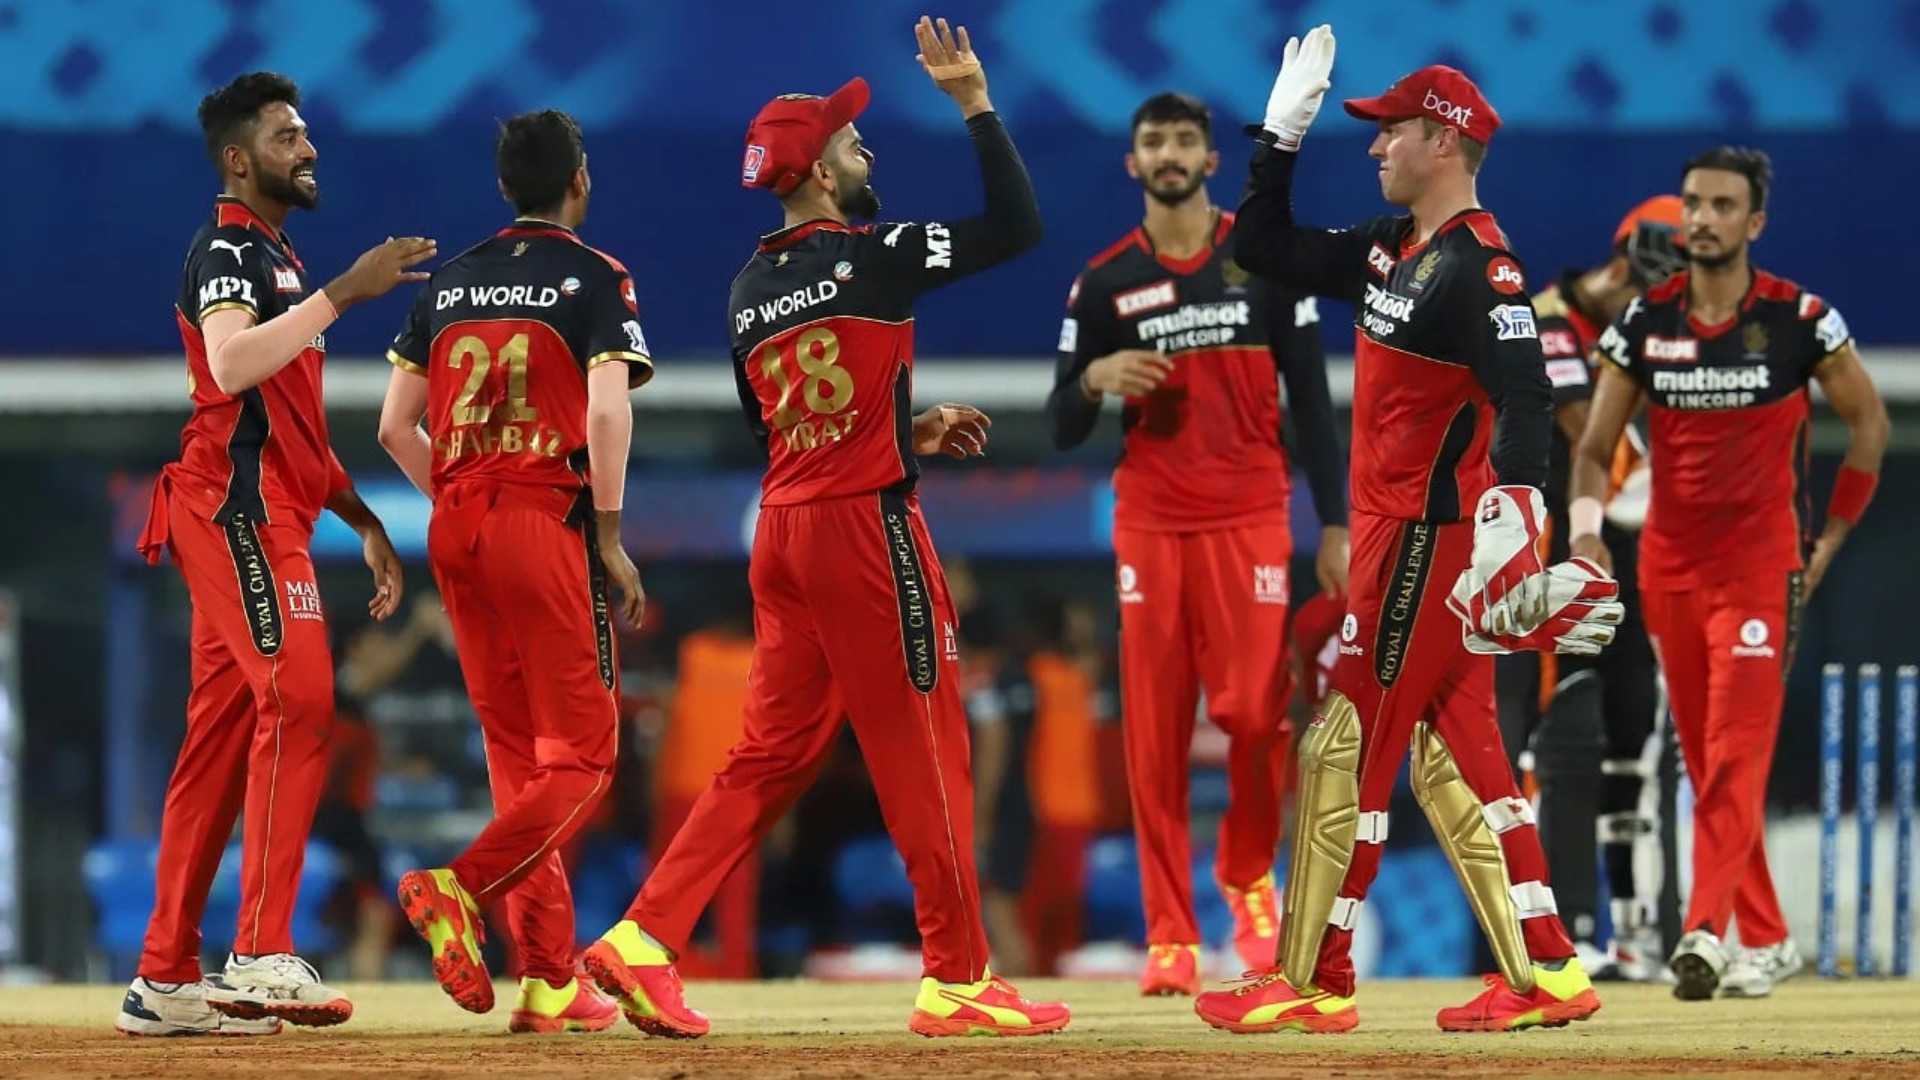 IPL 2021 - RCB players in a file photo. (Image credit: Twitter)